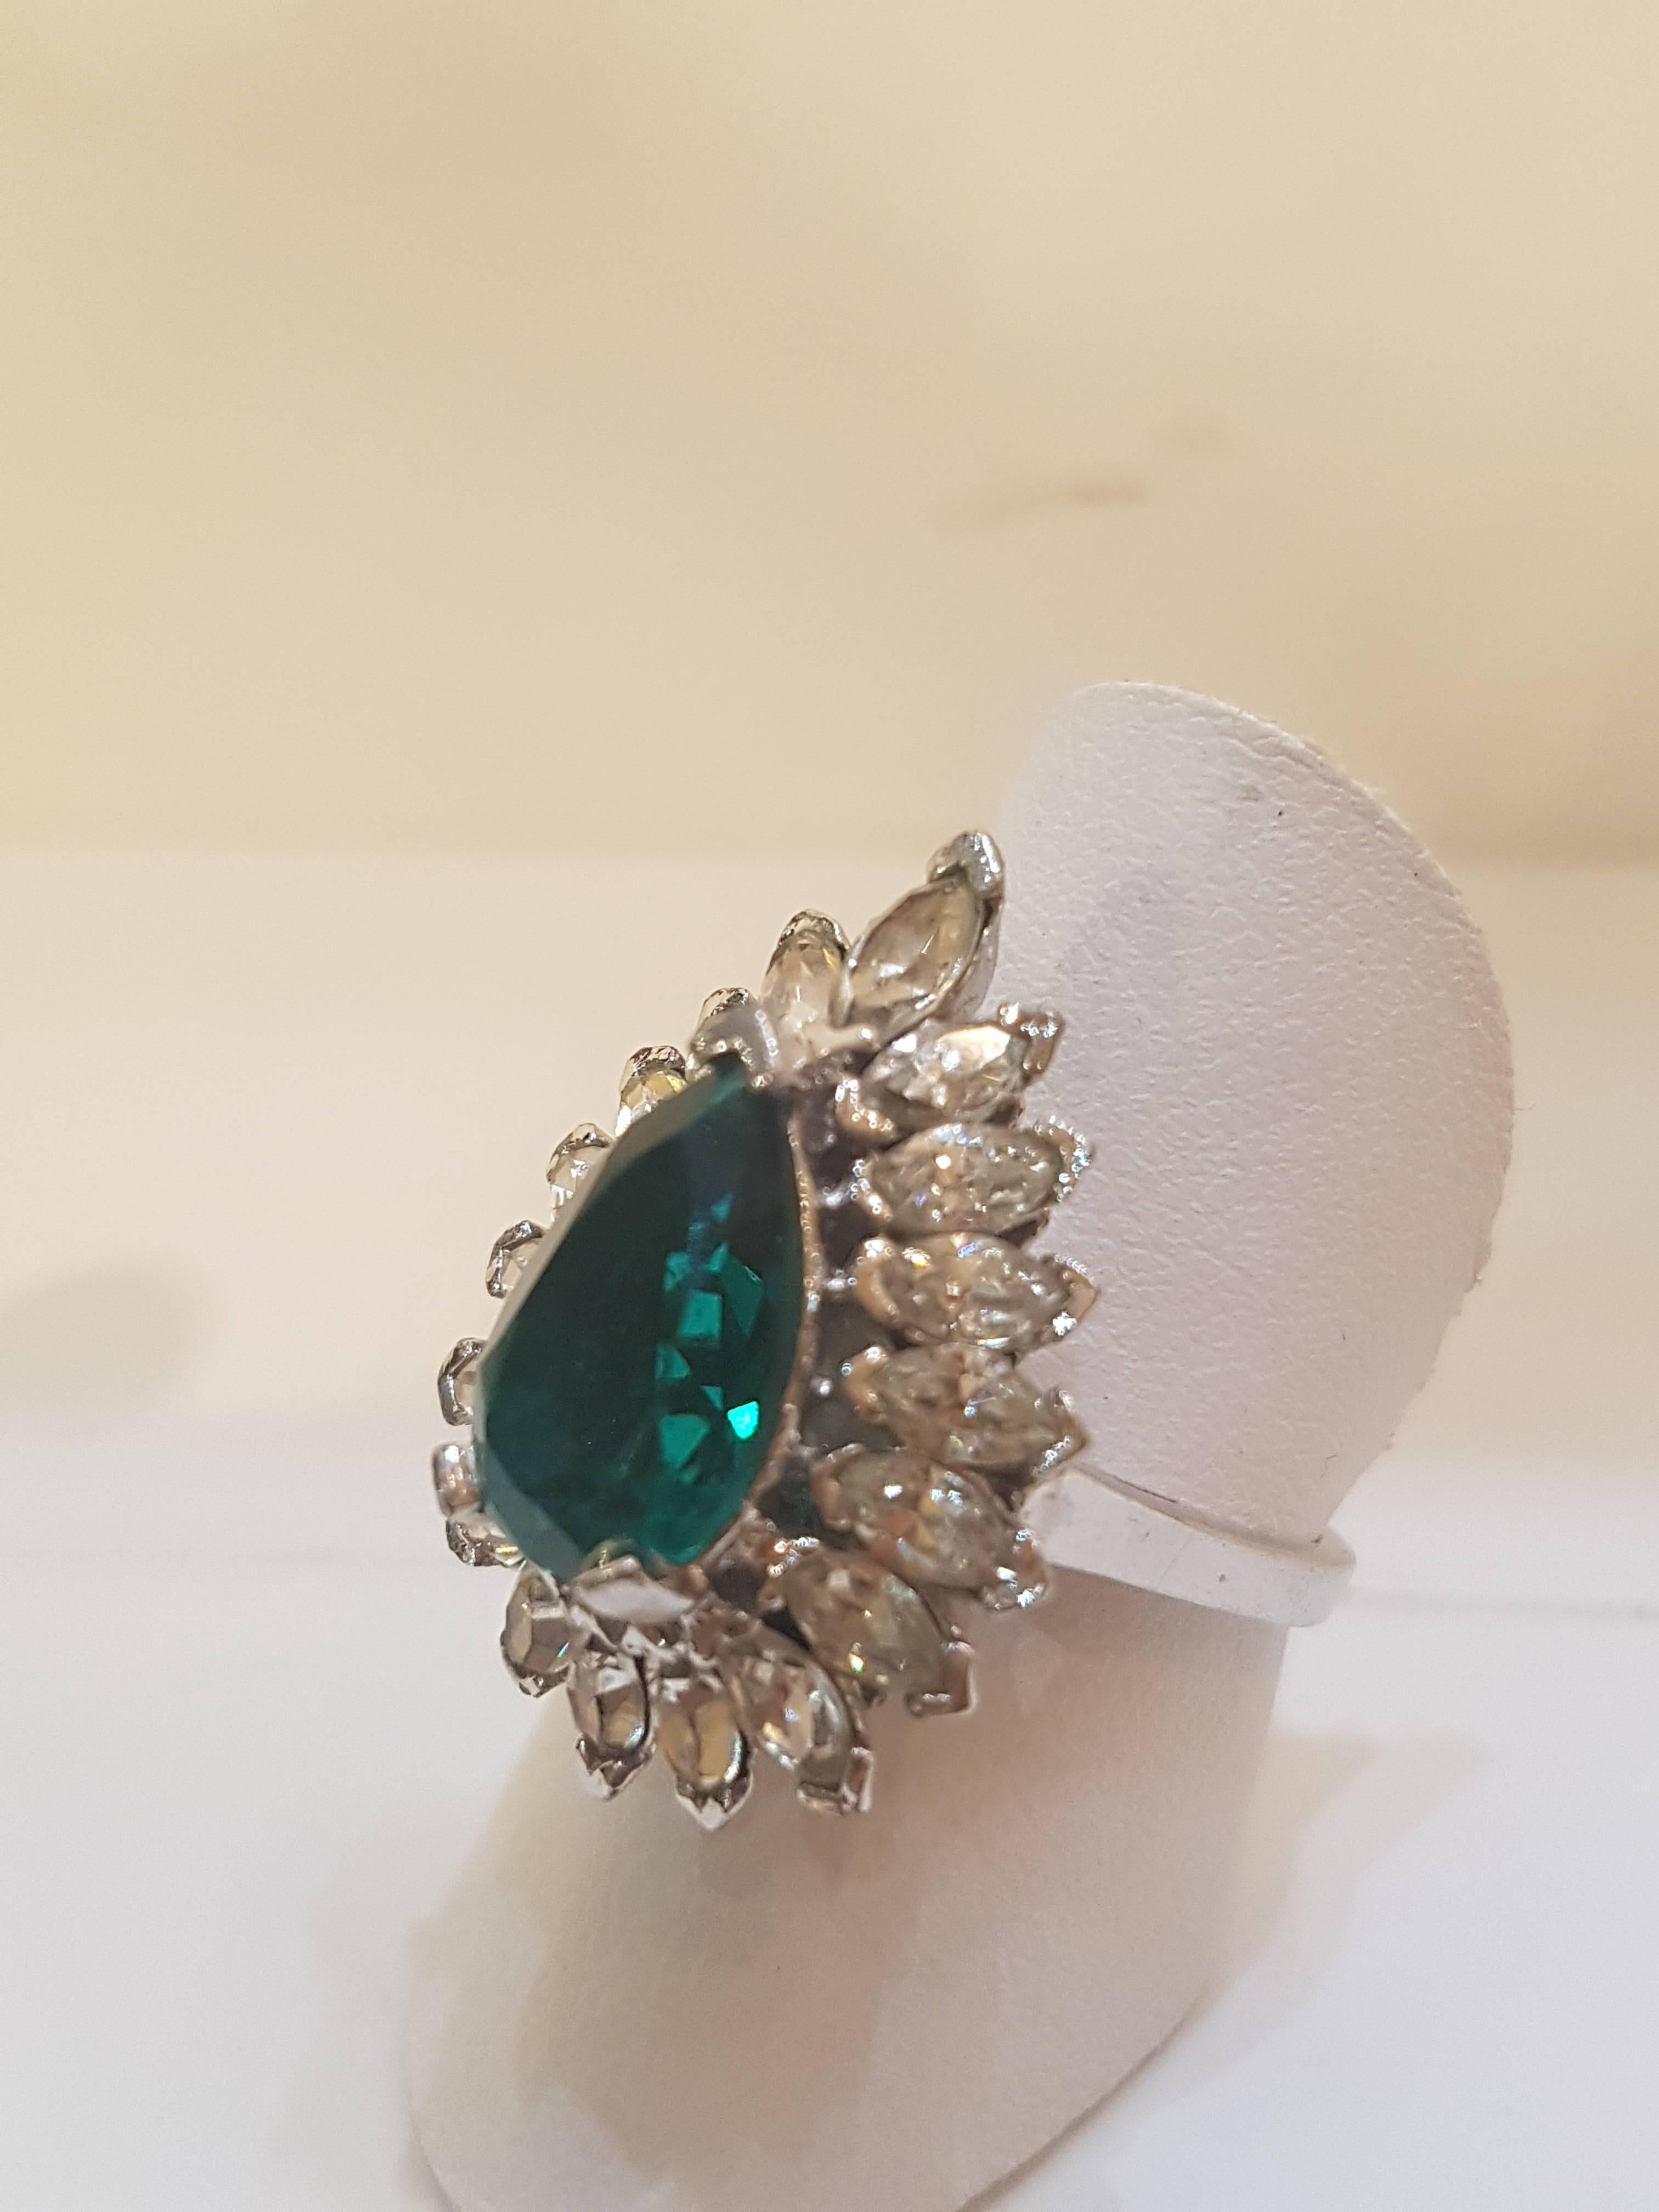 1980s Panetta silver tone ring
huge green tone stone with crystal all around
italian size range 13